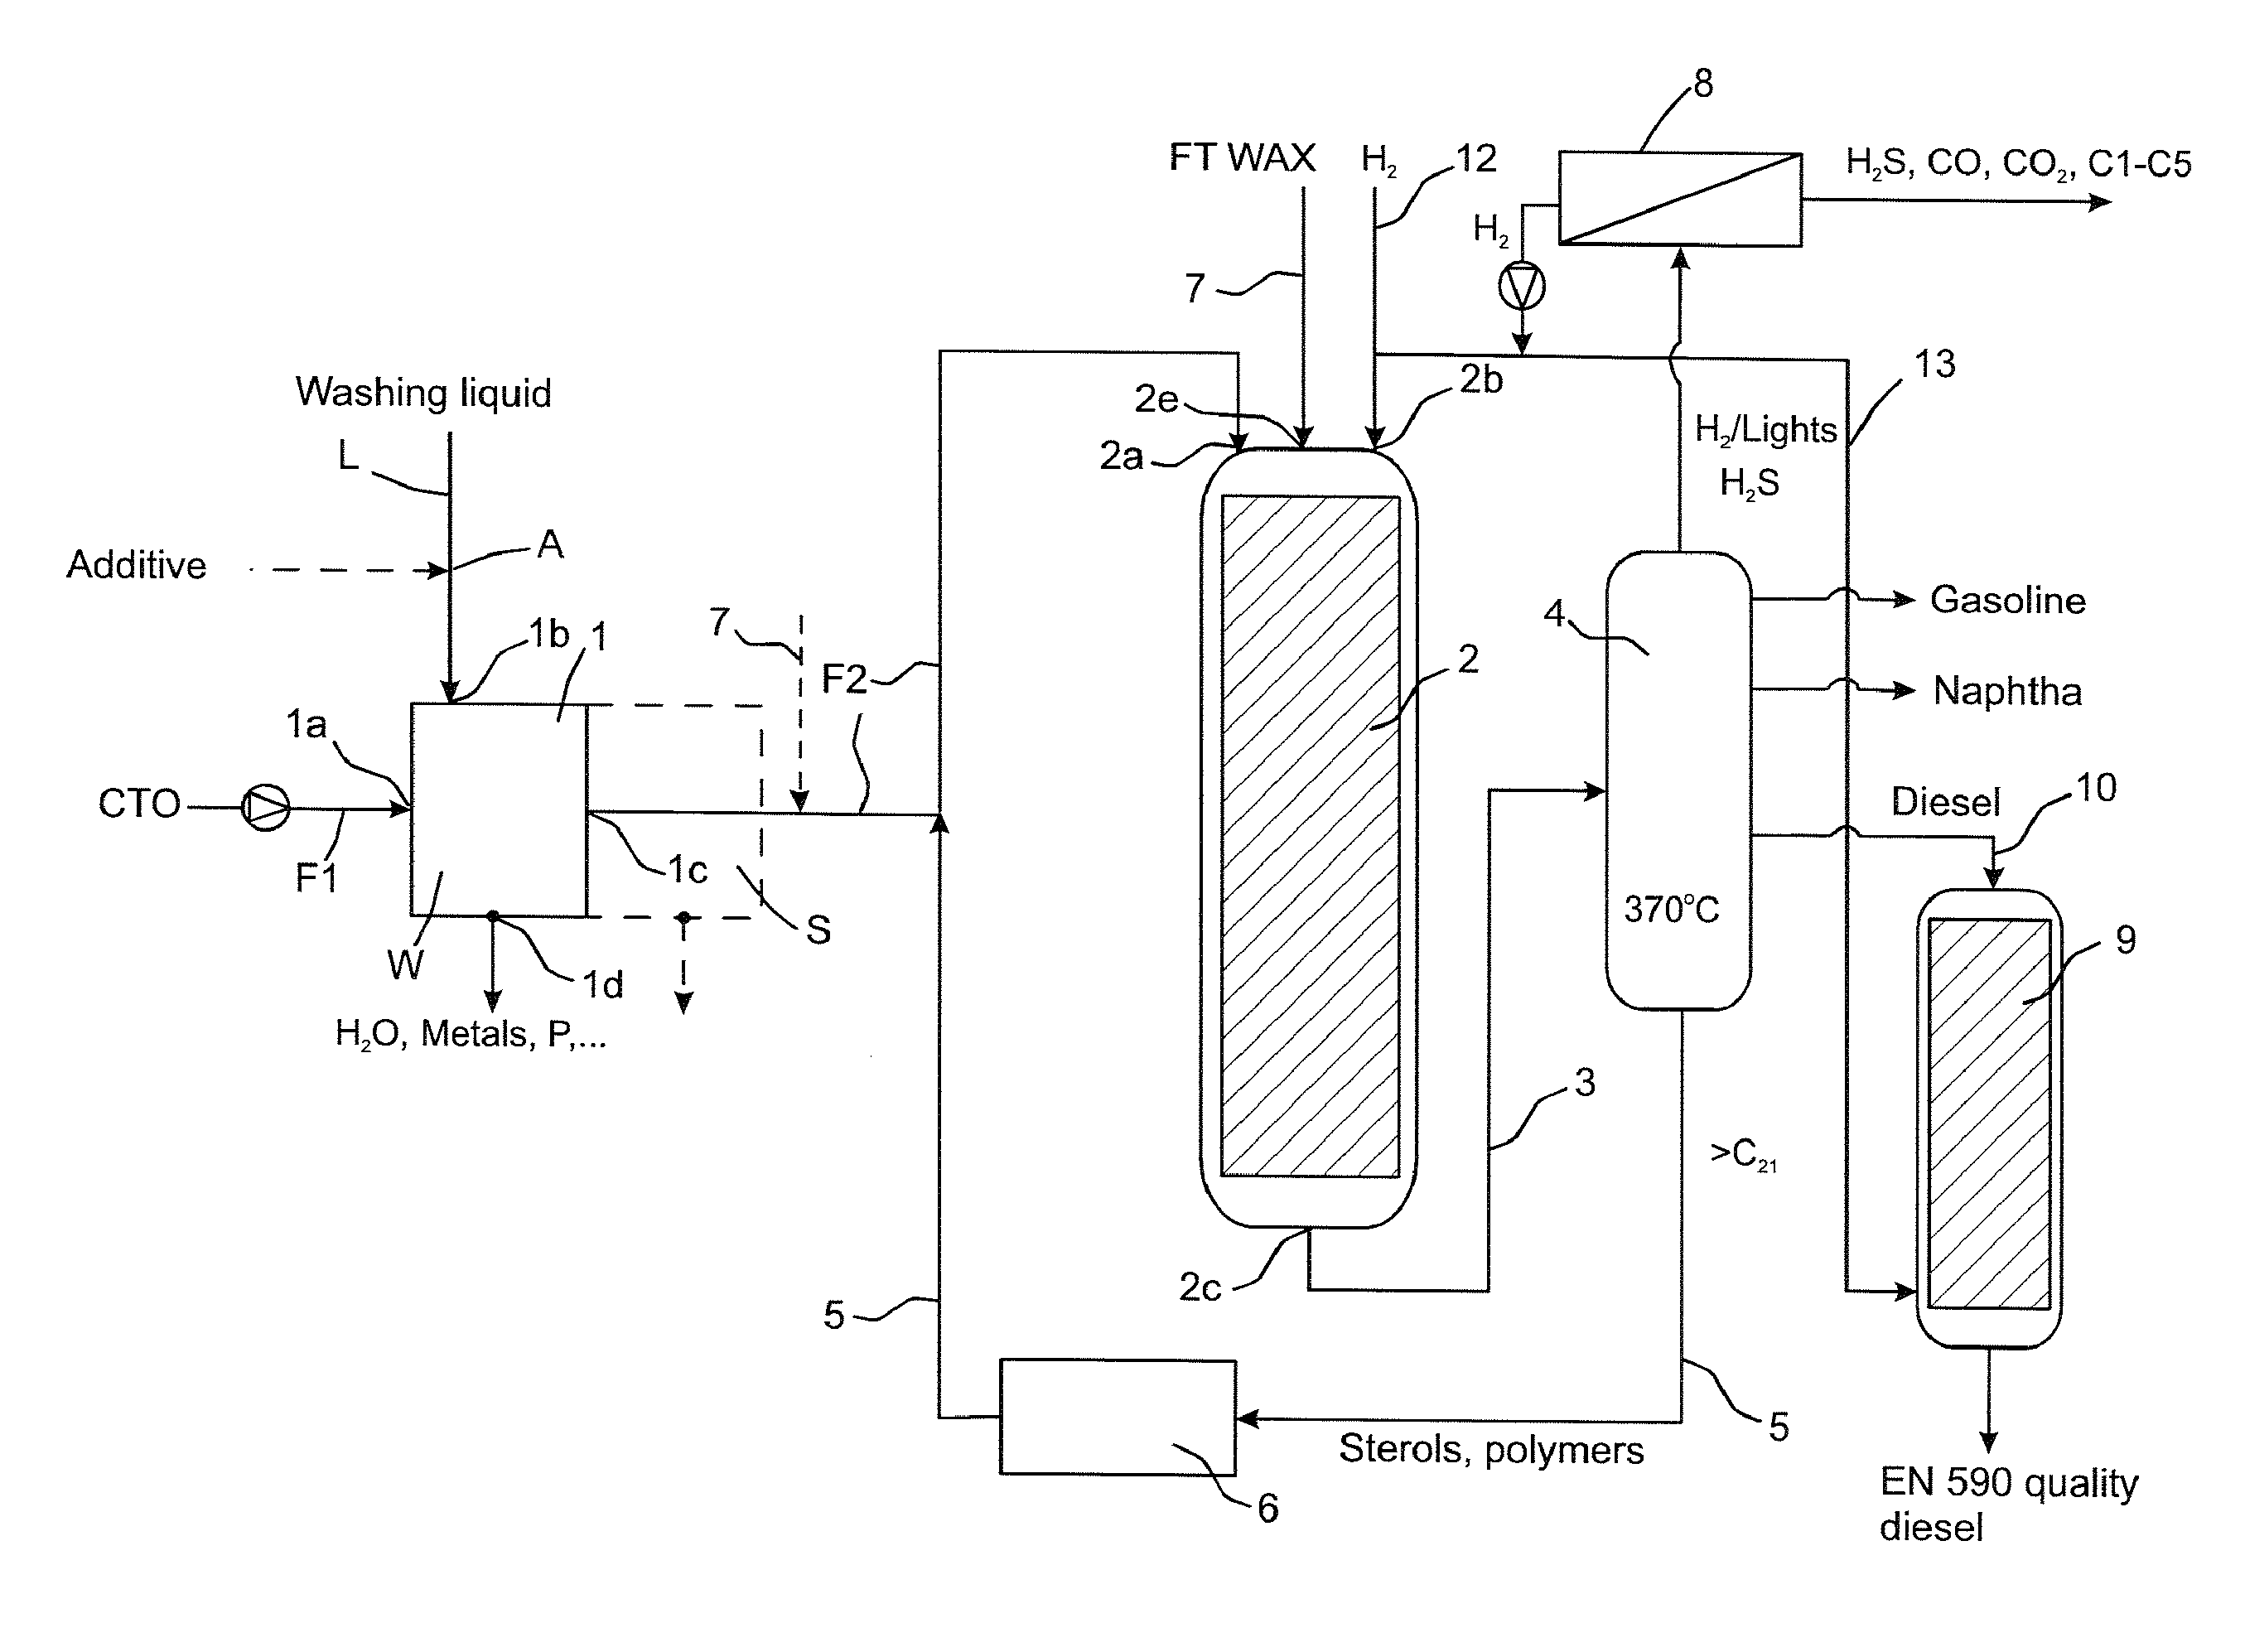 Method and apparatus for preparing fuel components from crude tall oil